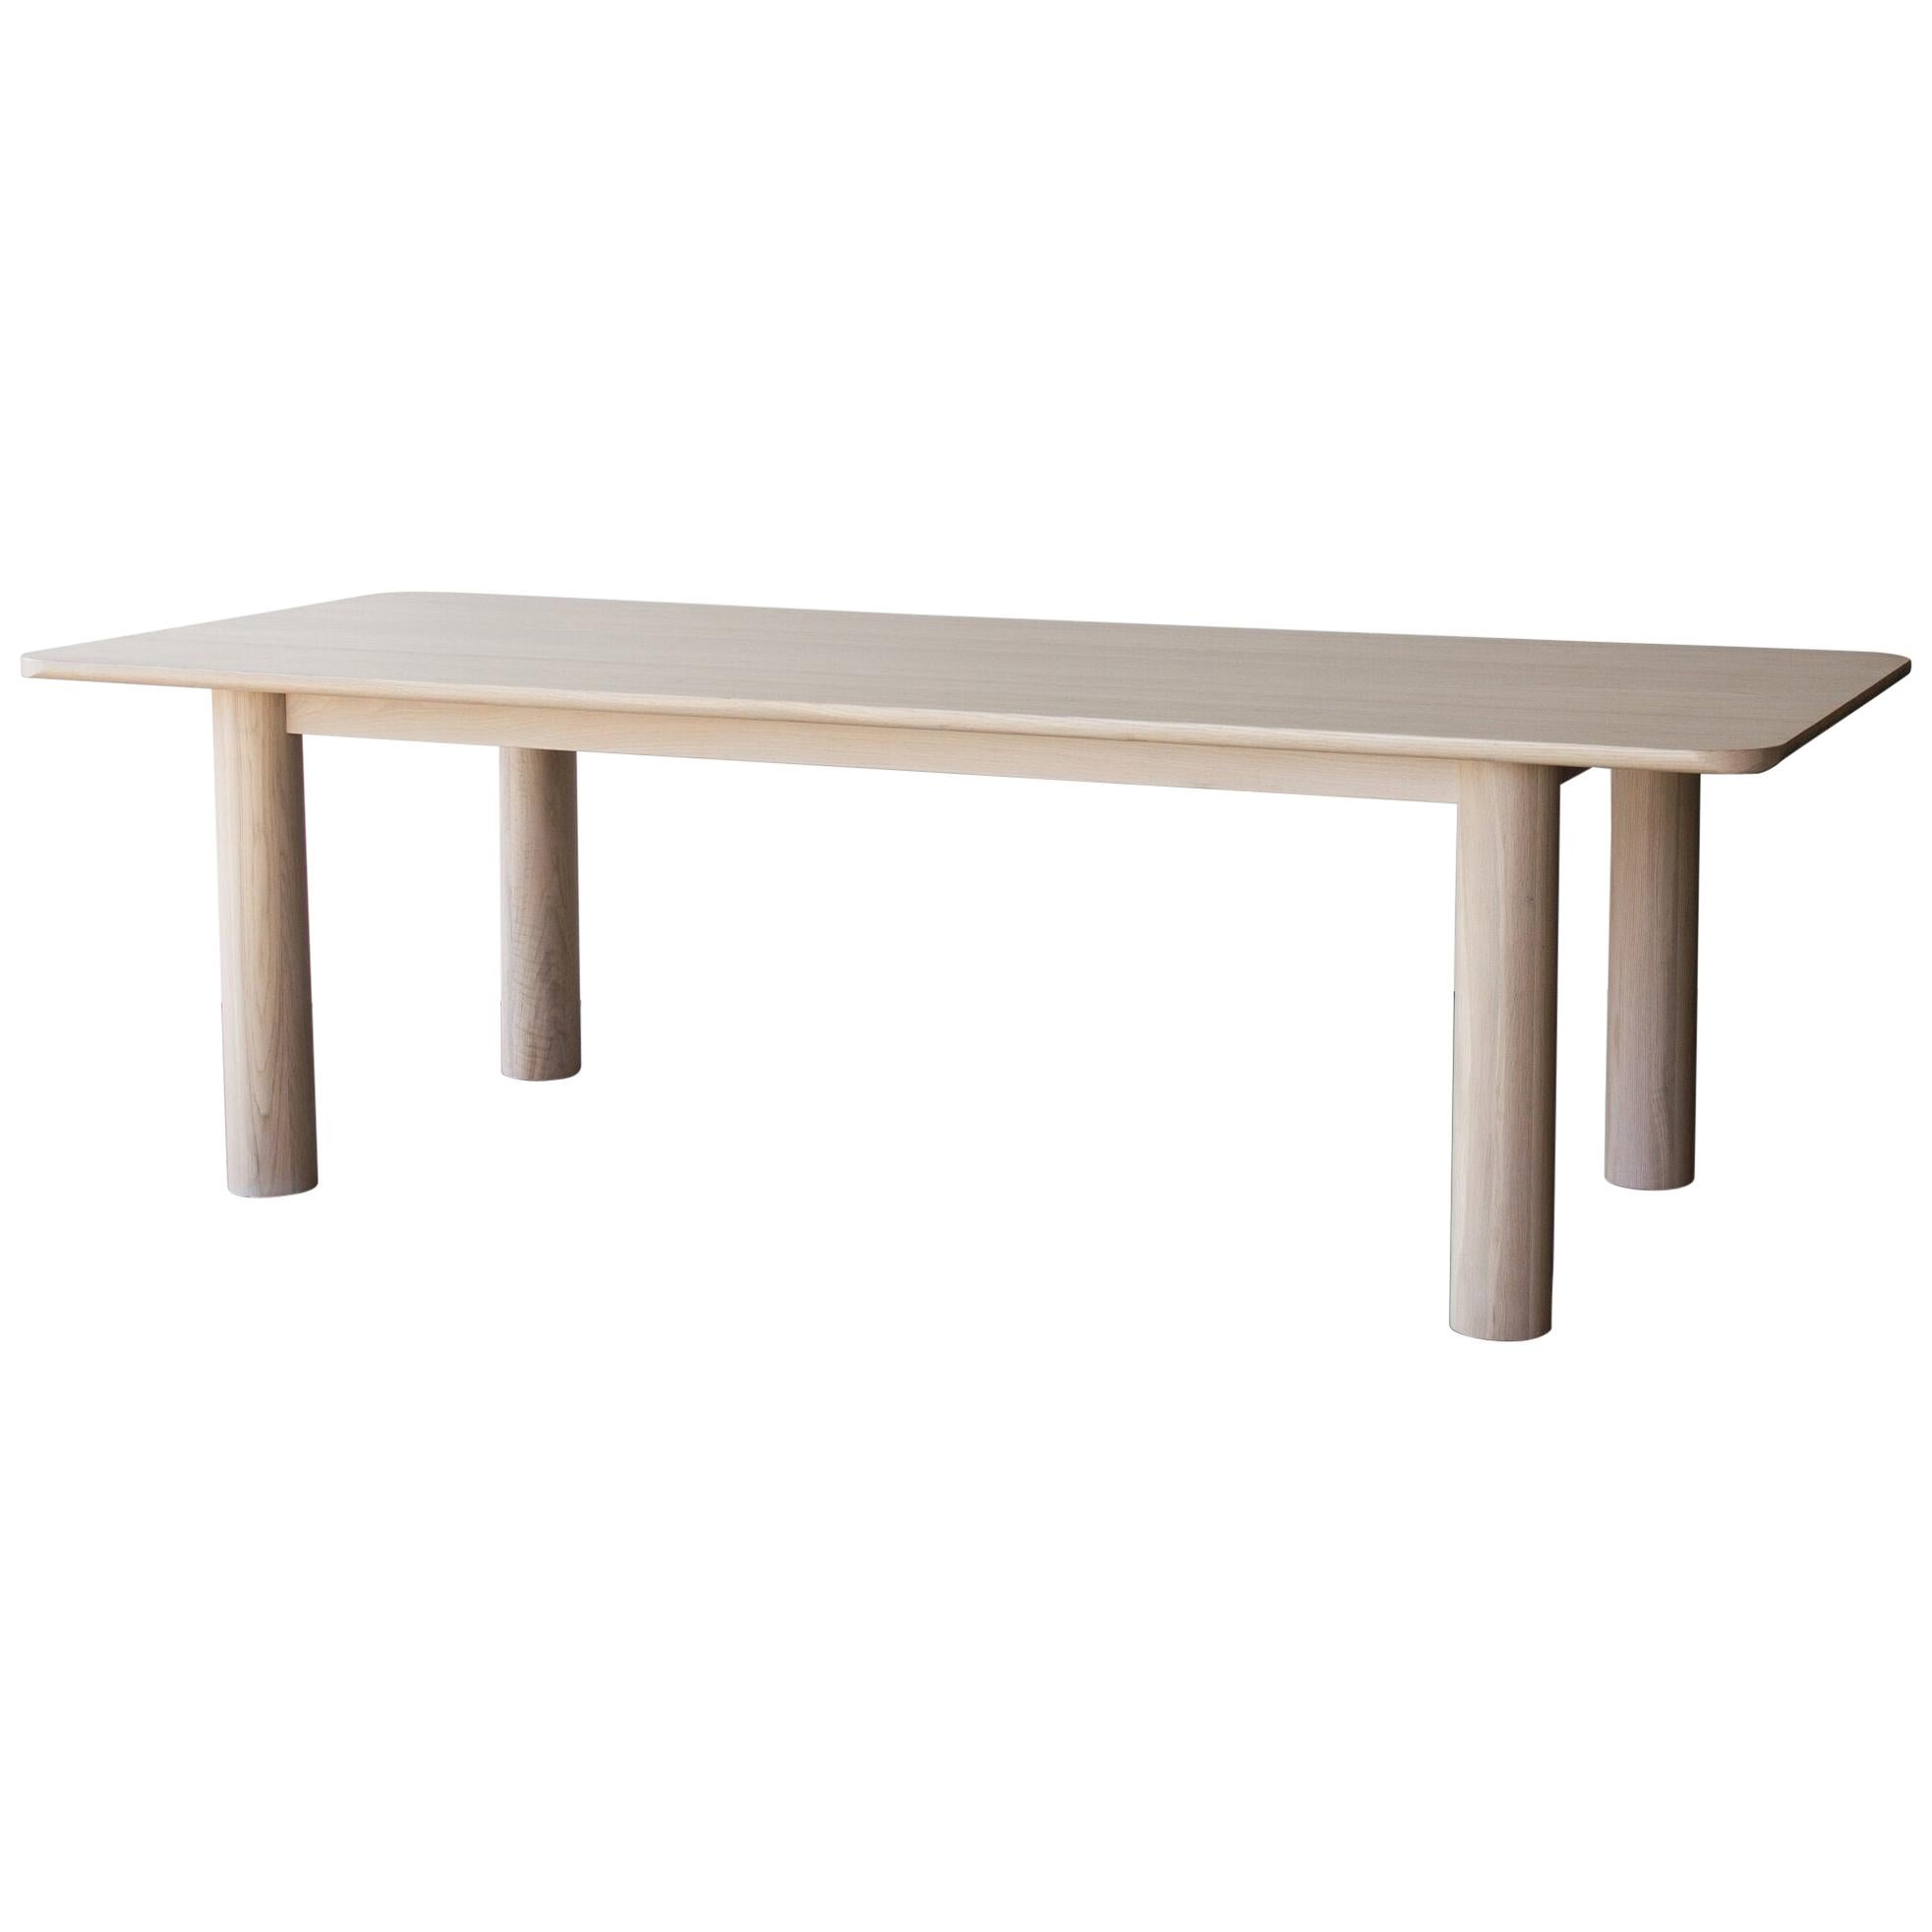 Arc Dining Table, Nude, Minimalist Dining Table in Wood